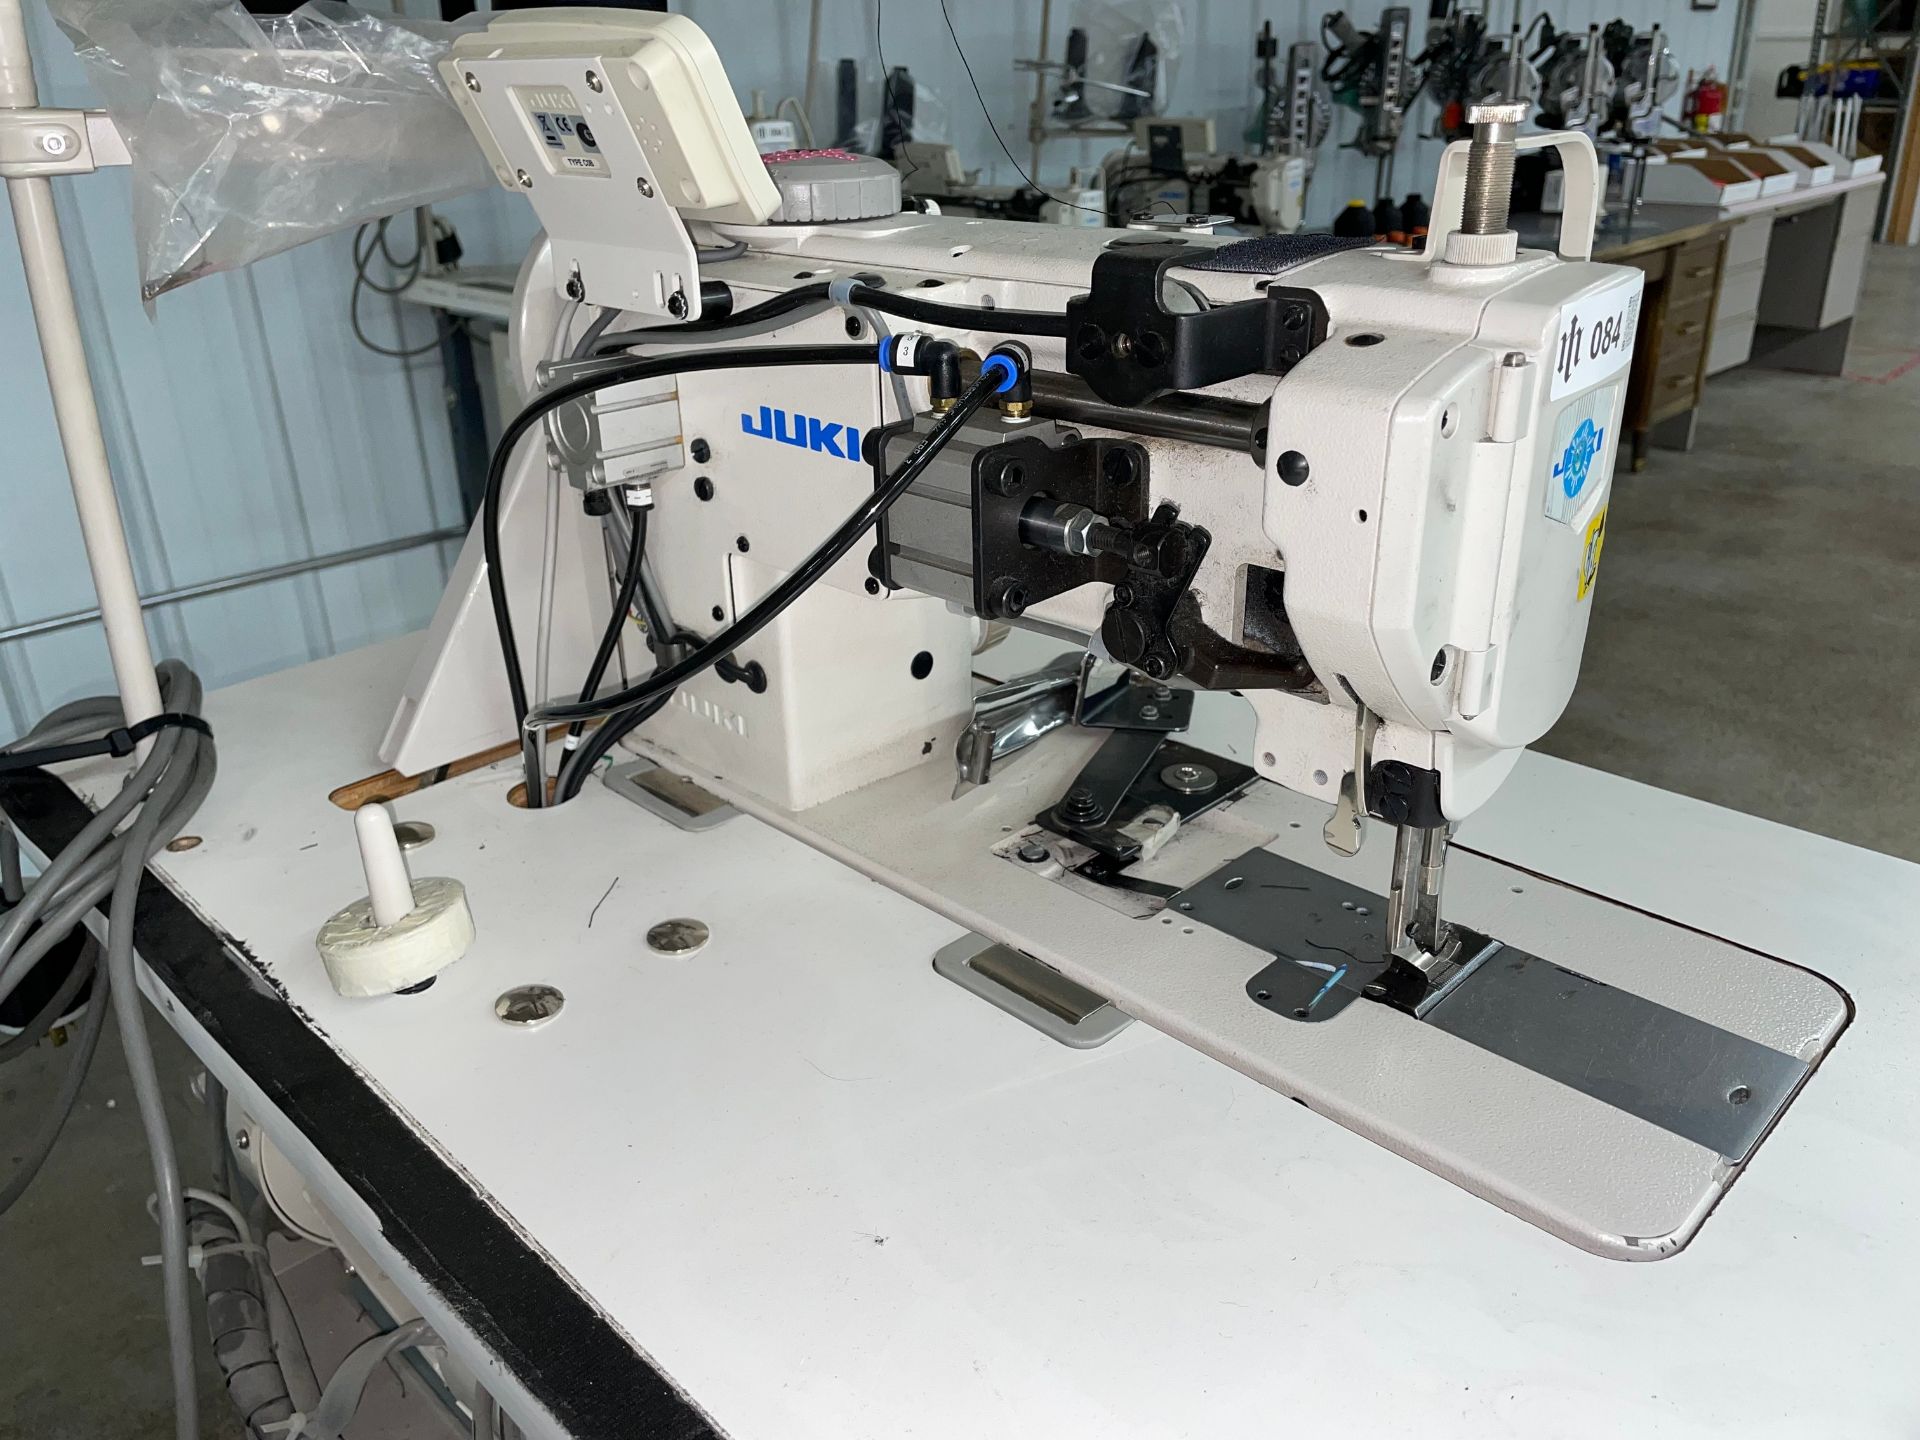 Juki Industrial Sewing Machine with Table - Image 3 of 11